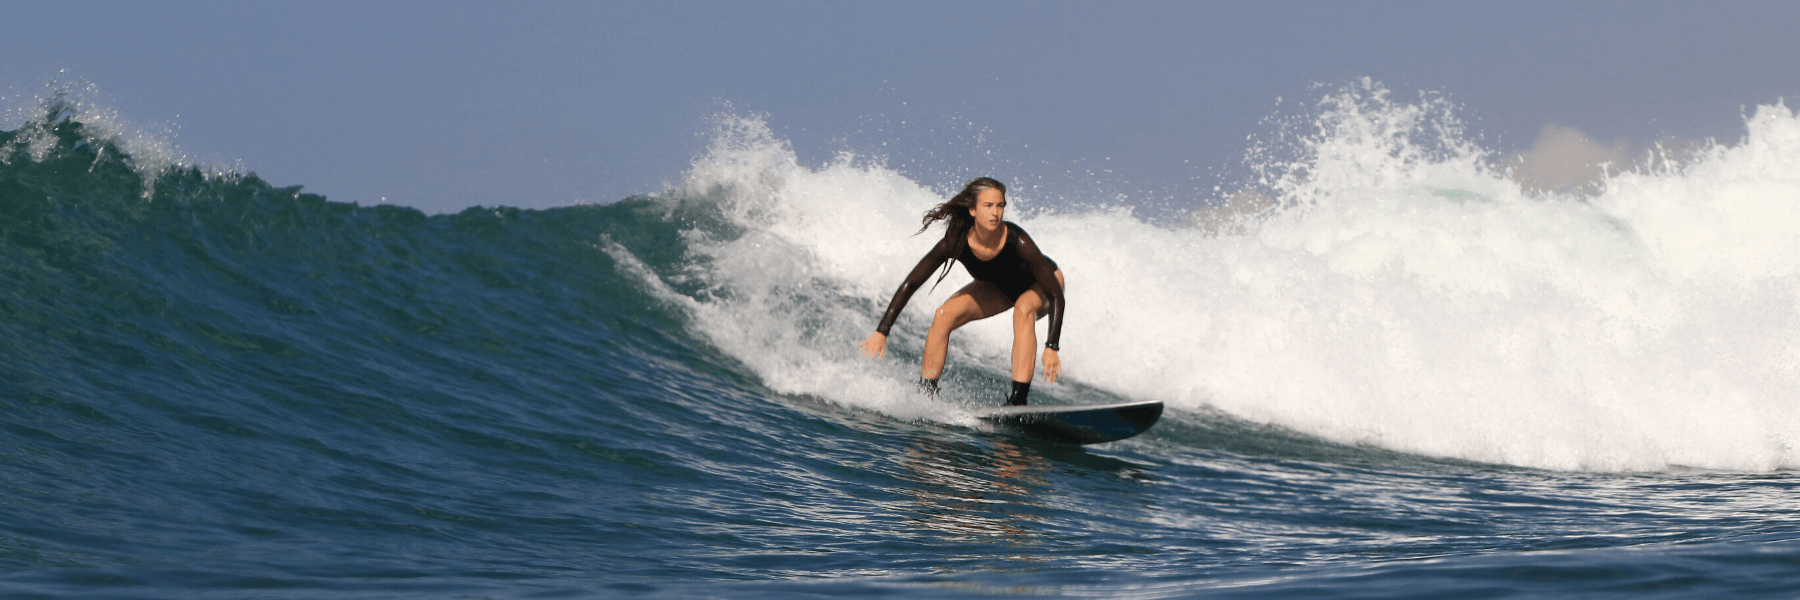 The Best D&B Swimsuit Styles for Surfing